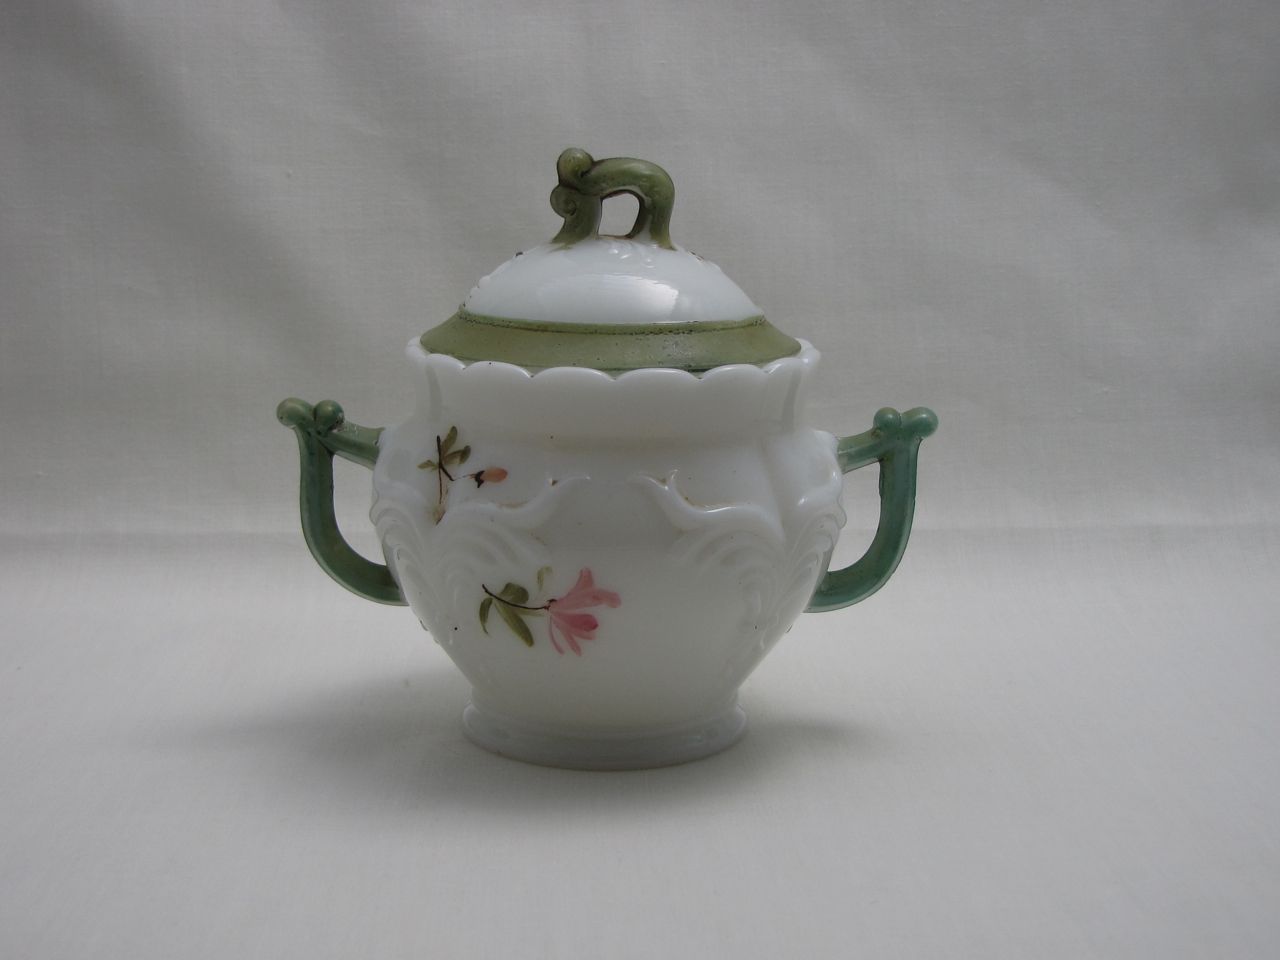 #1280 Winged Scroll Sugar Bowl and Cover, with decorations, 1899-1904